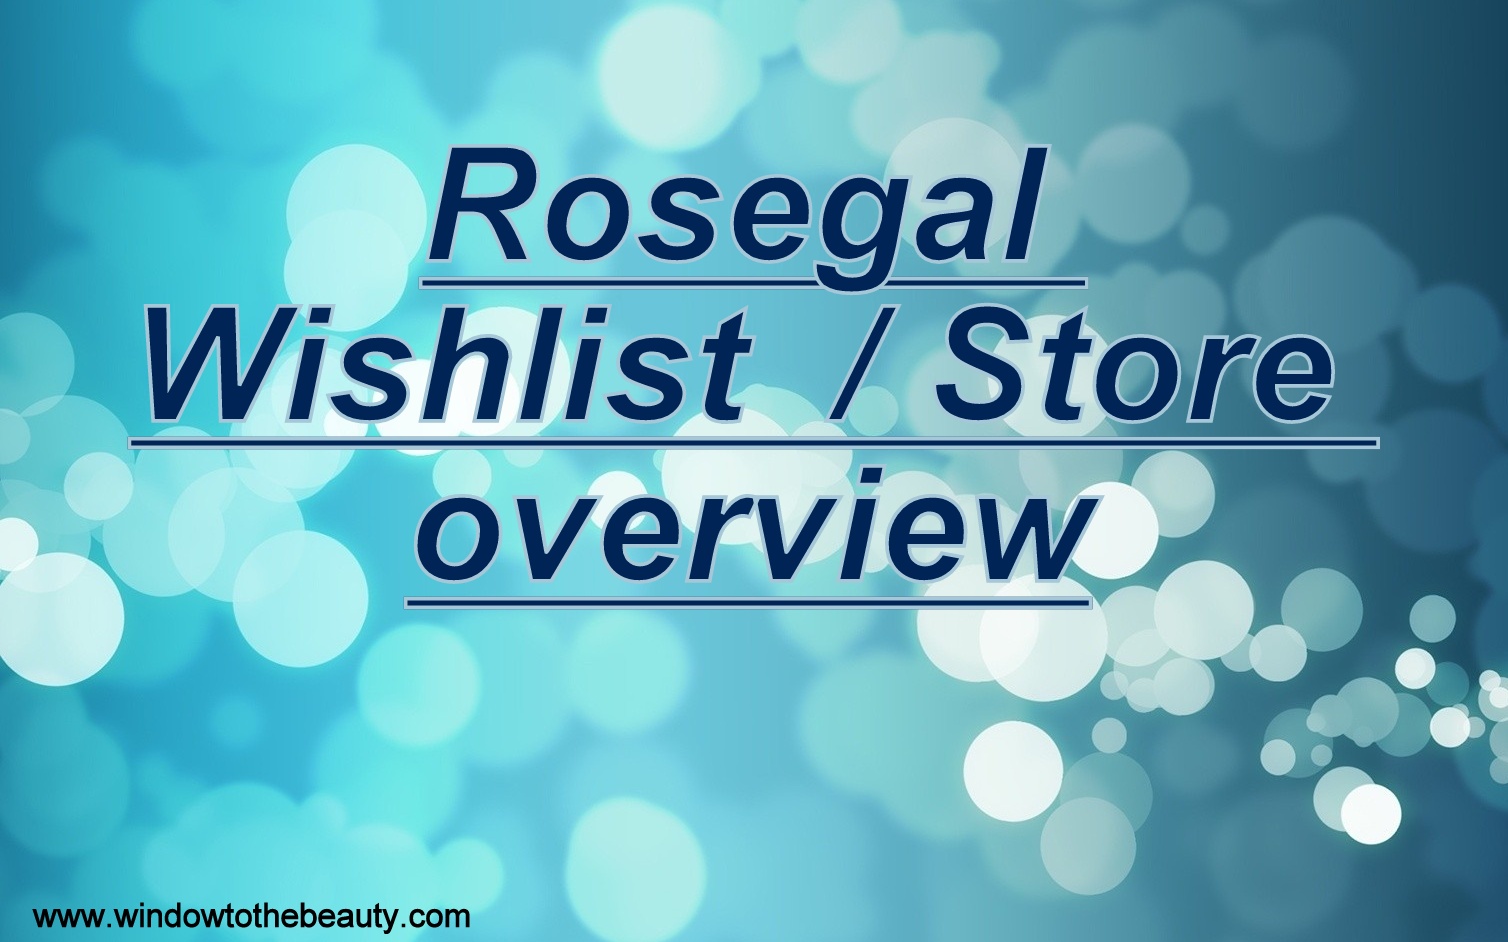 Window to The beauty: Rosegal Wishlist / Store overview
